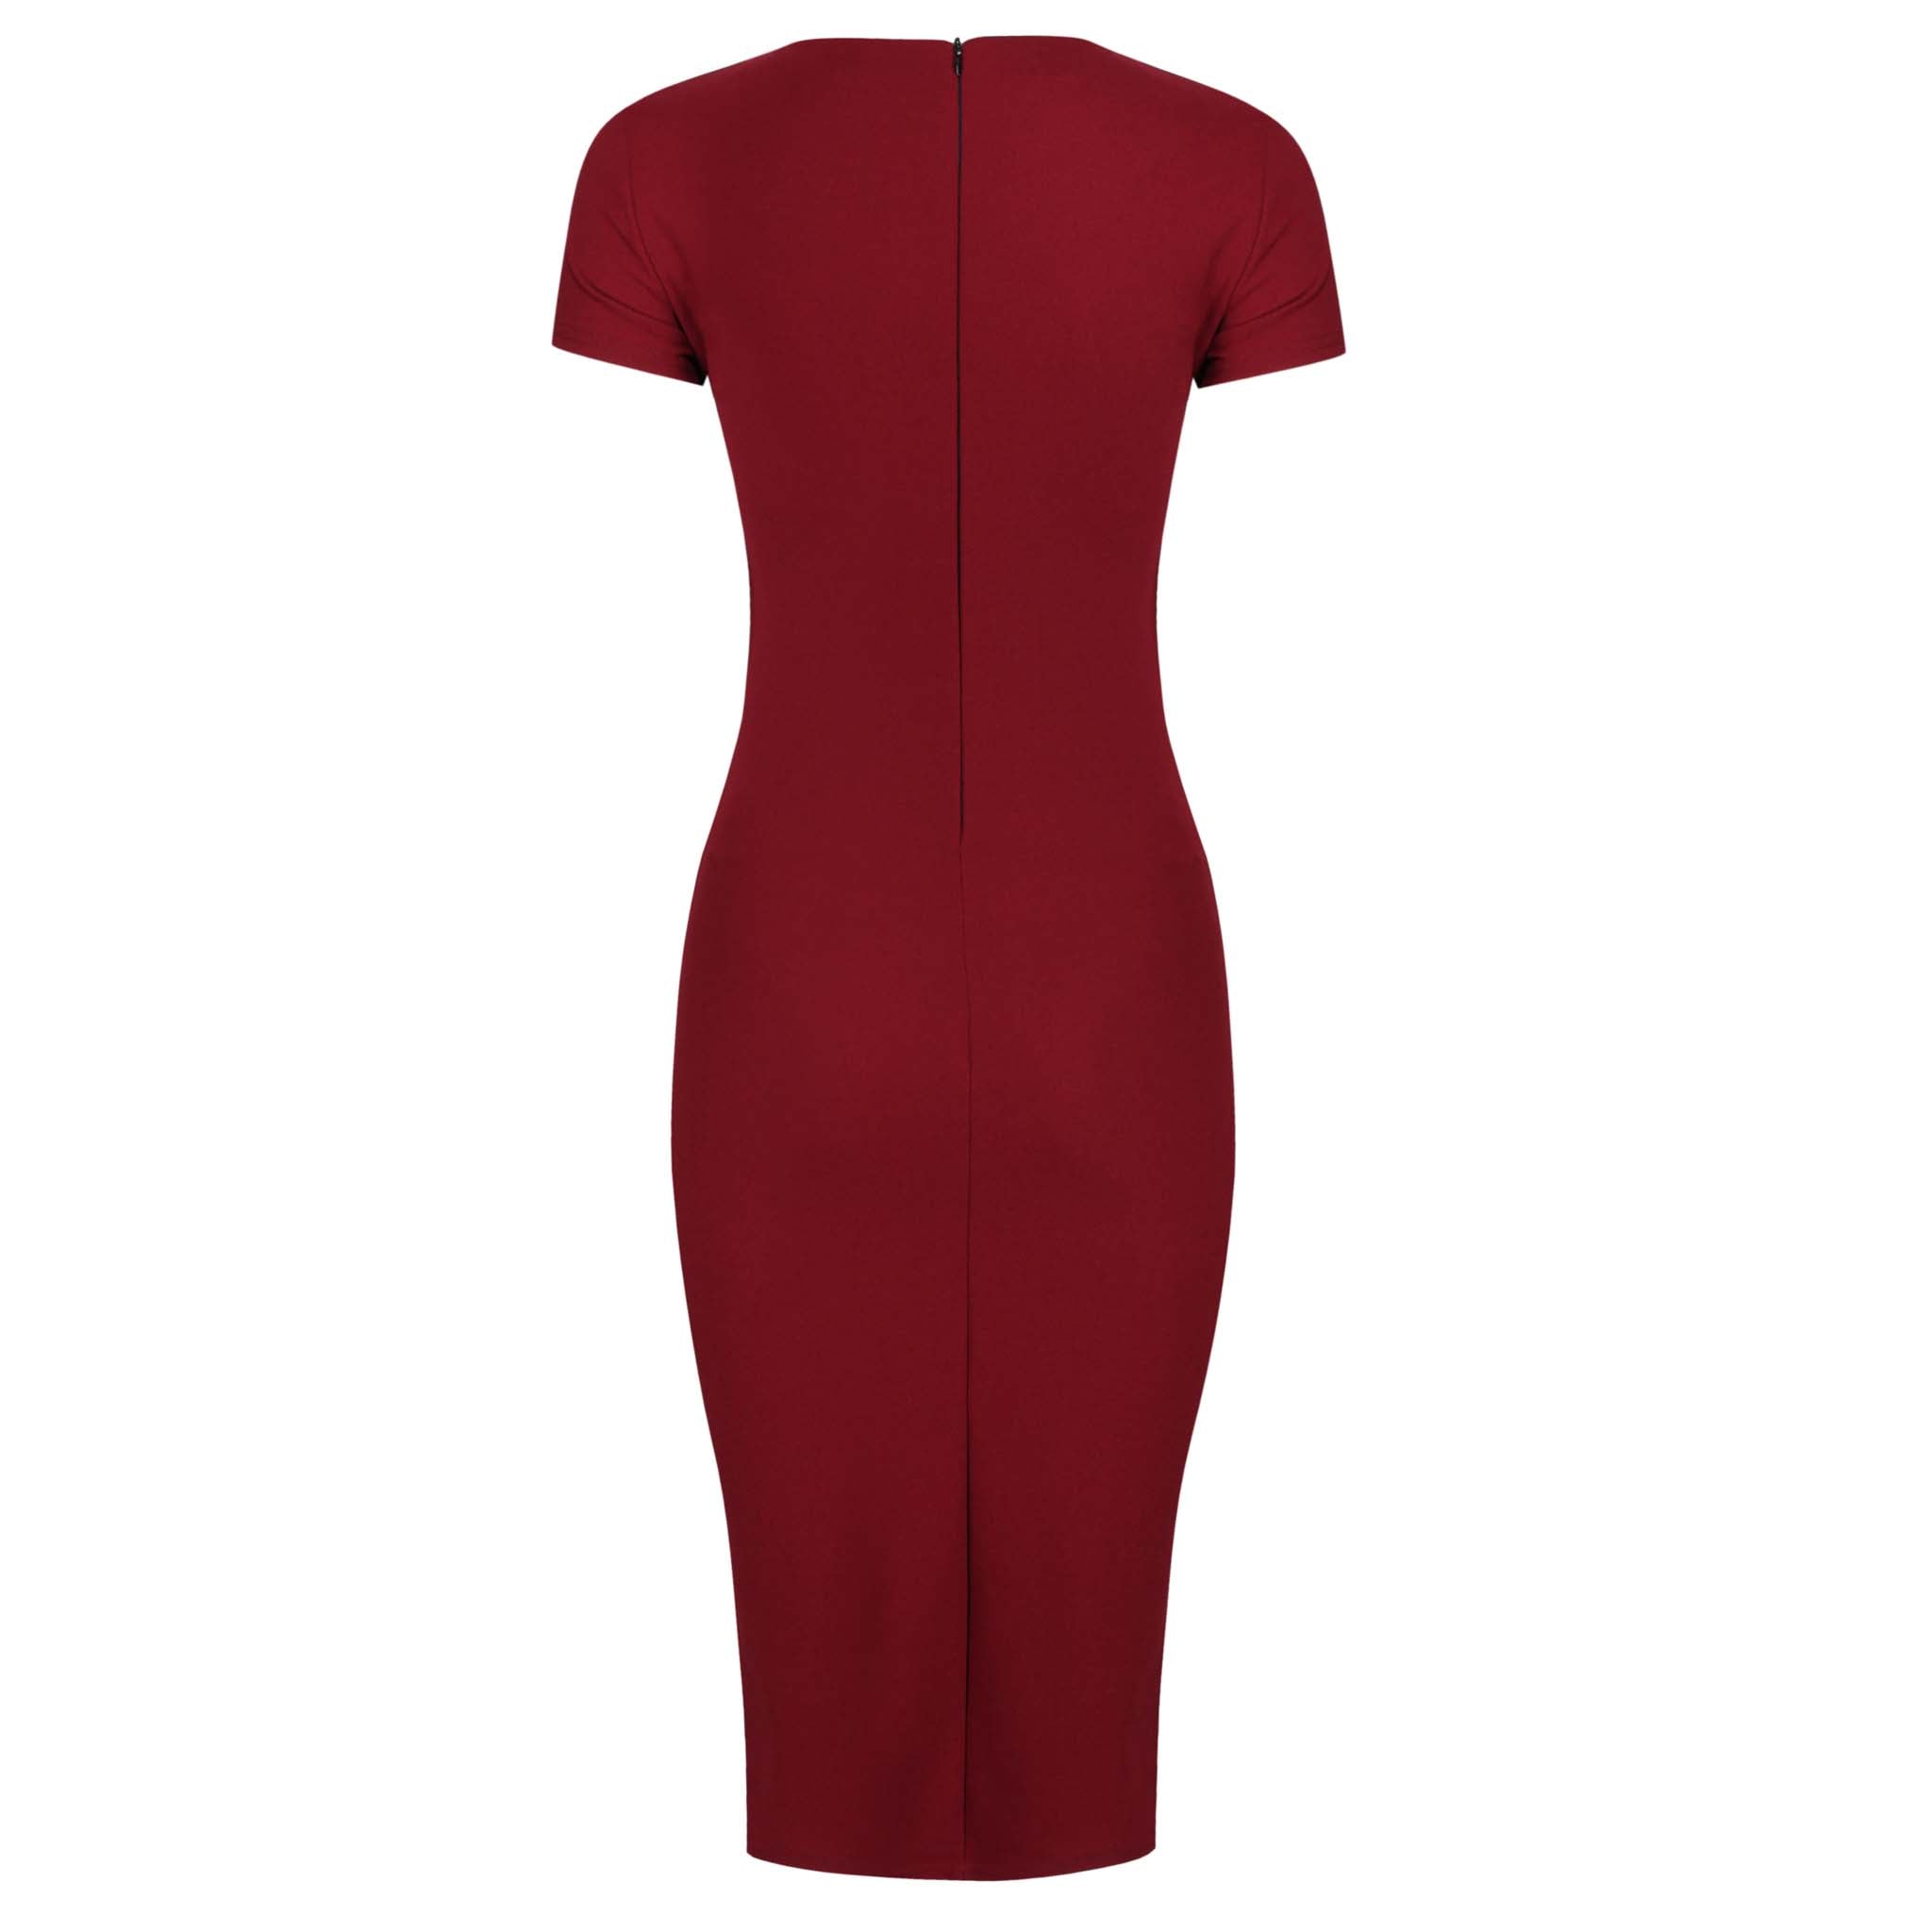 Wine Red Short Sleeve Ruched Tie Bodycon Pencil Dress